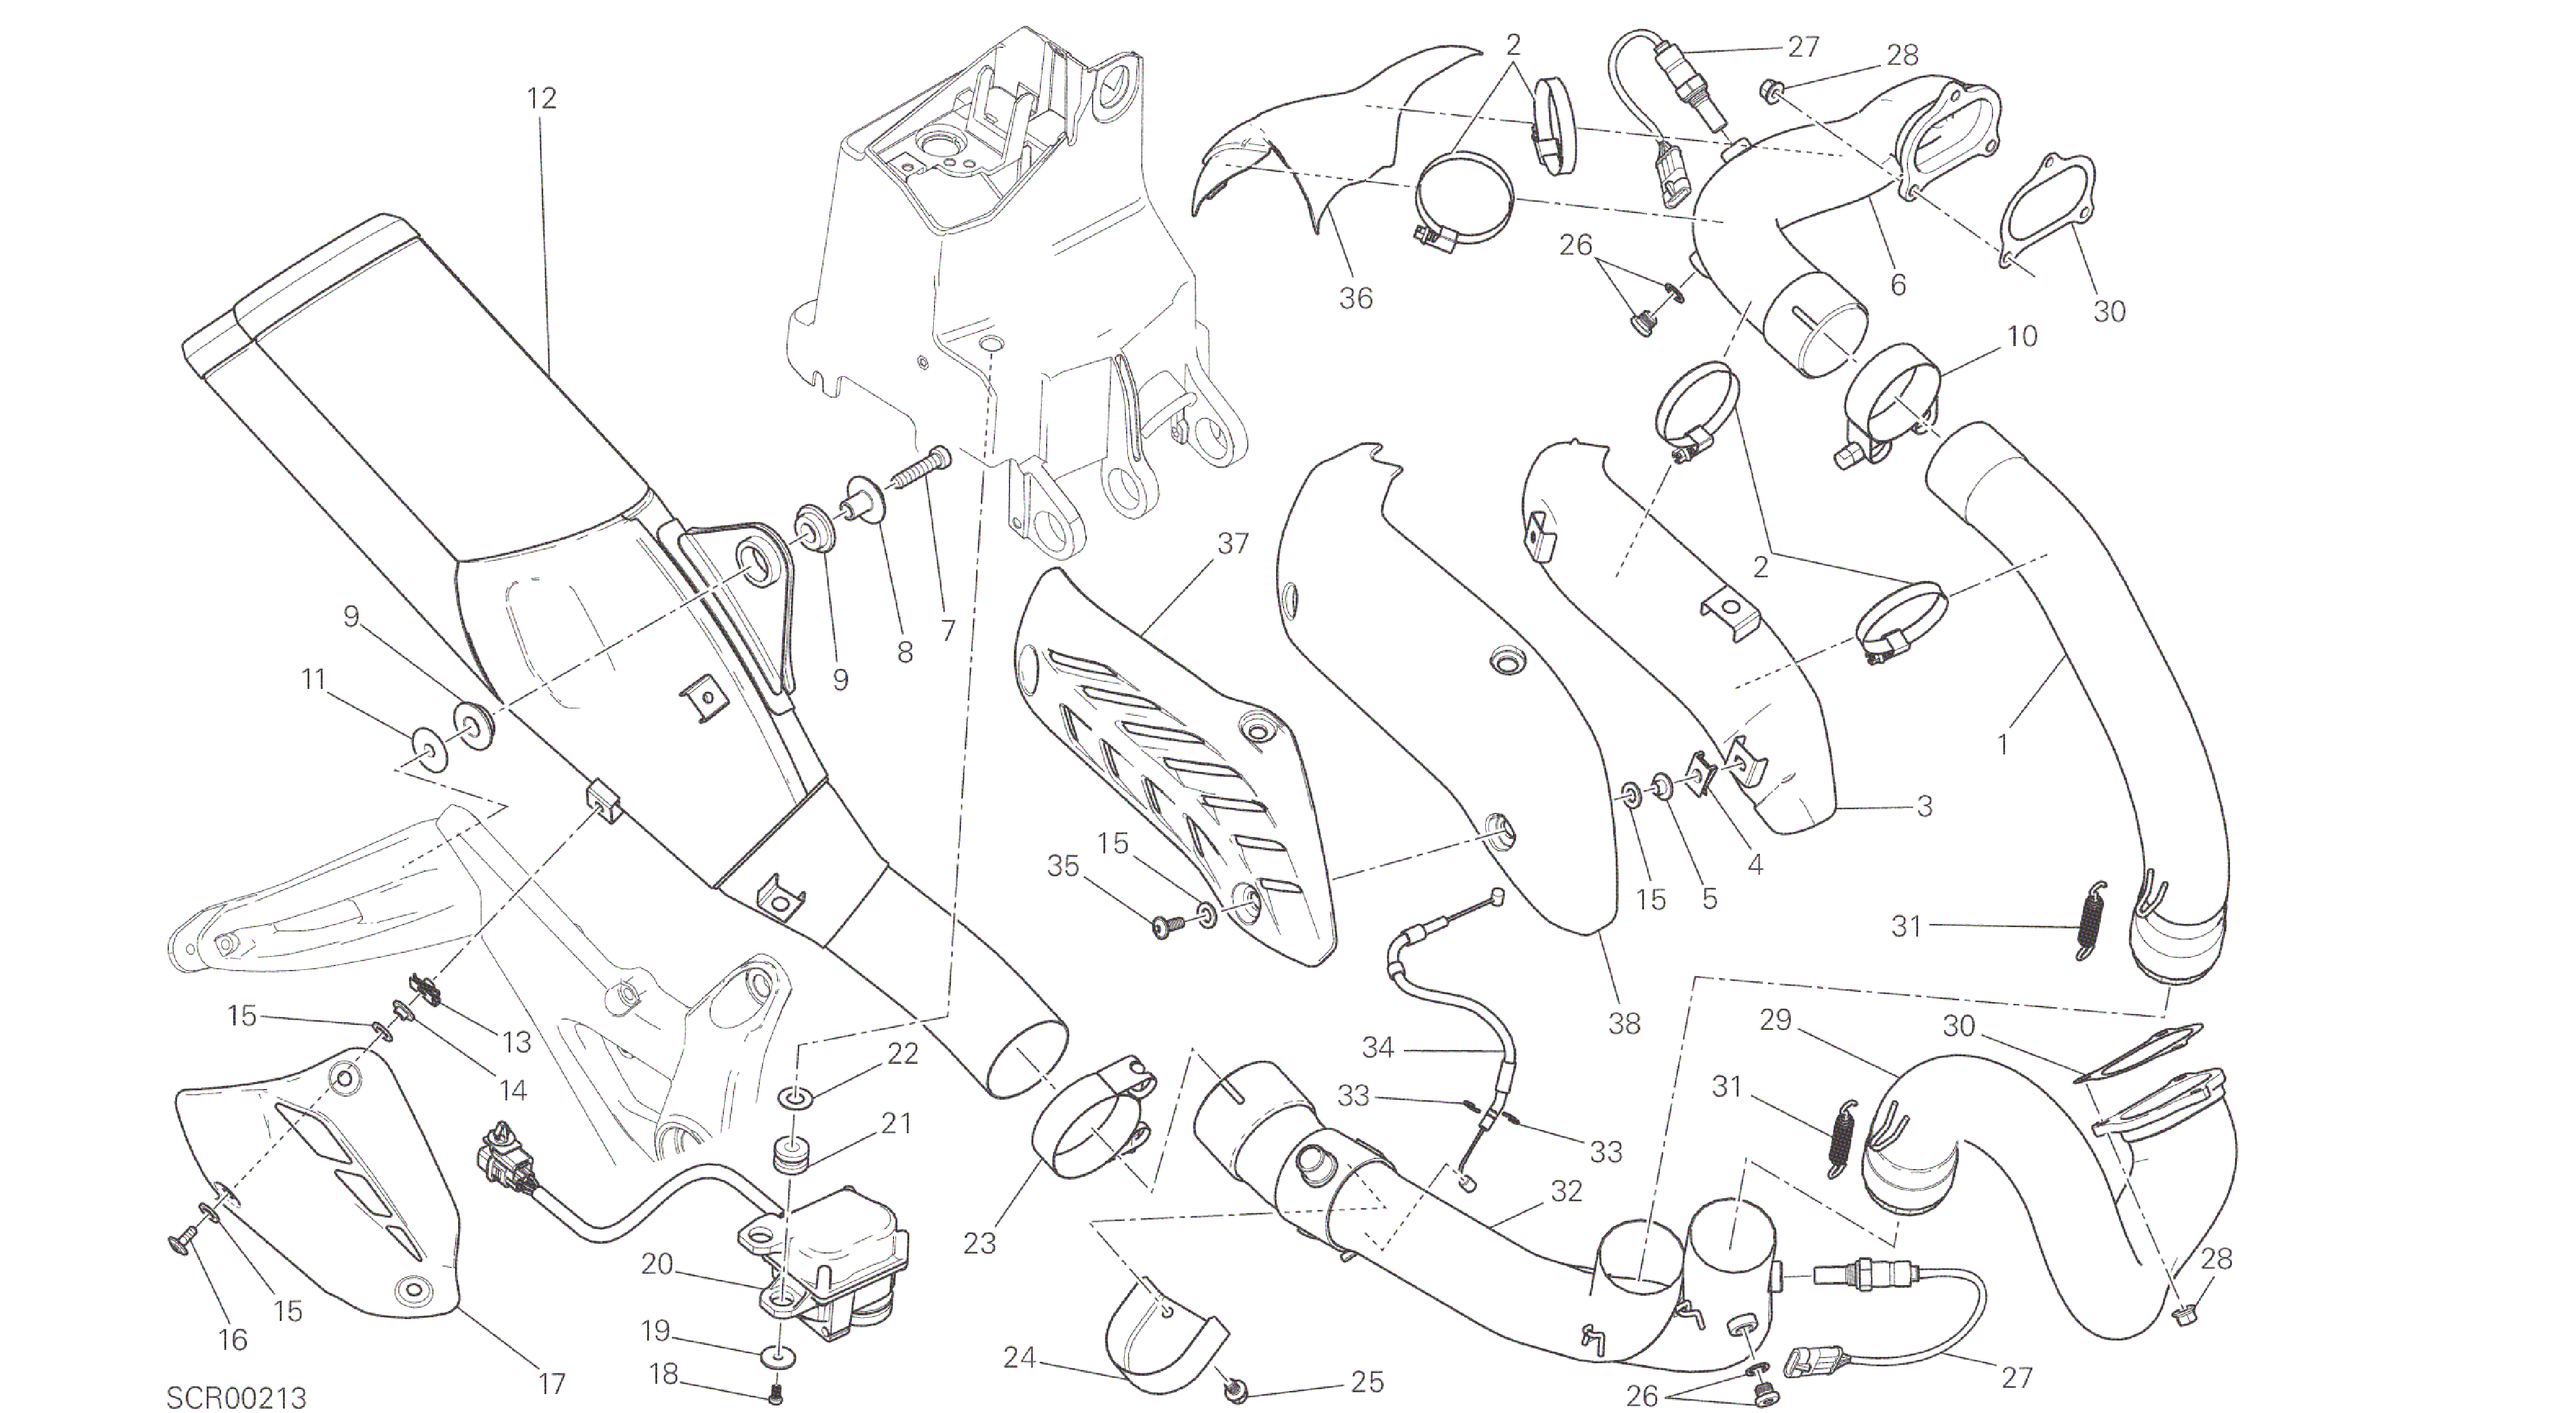 DRAWING 019 - EXHAUST SYSTEM [MOD:M 821]GROUP FRAME